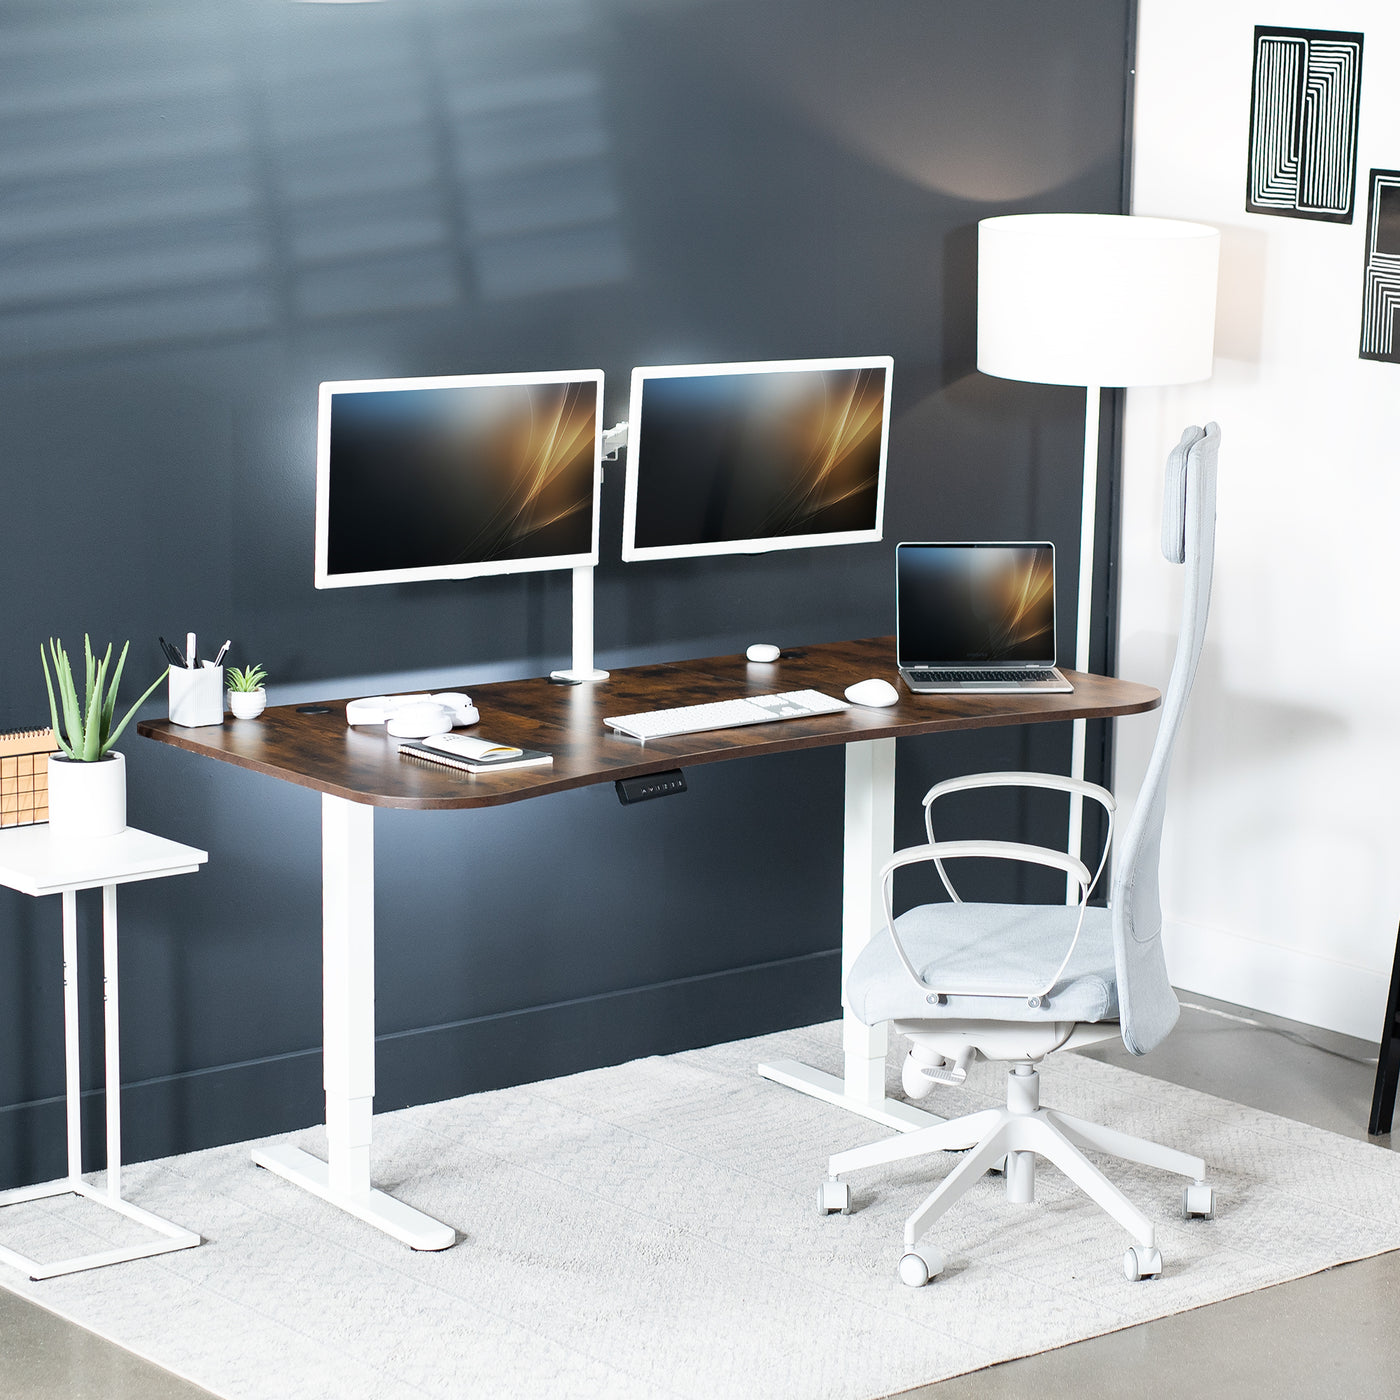 Large rustic standing desk featuring smooth height adjustment, powerful dual motors, and a simple push-button controller featuring memory presets.